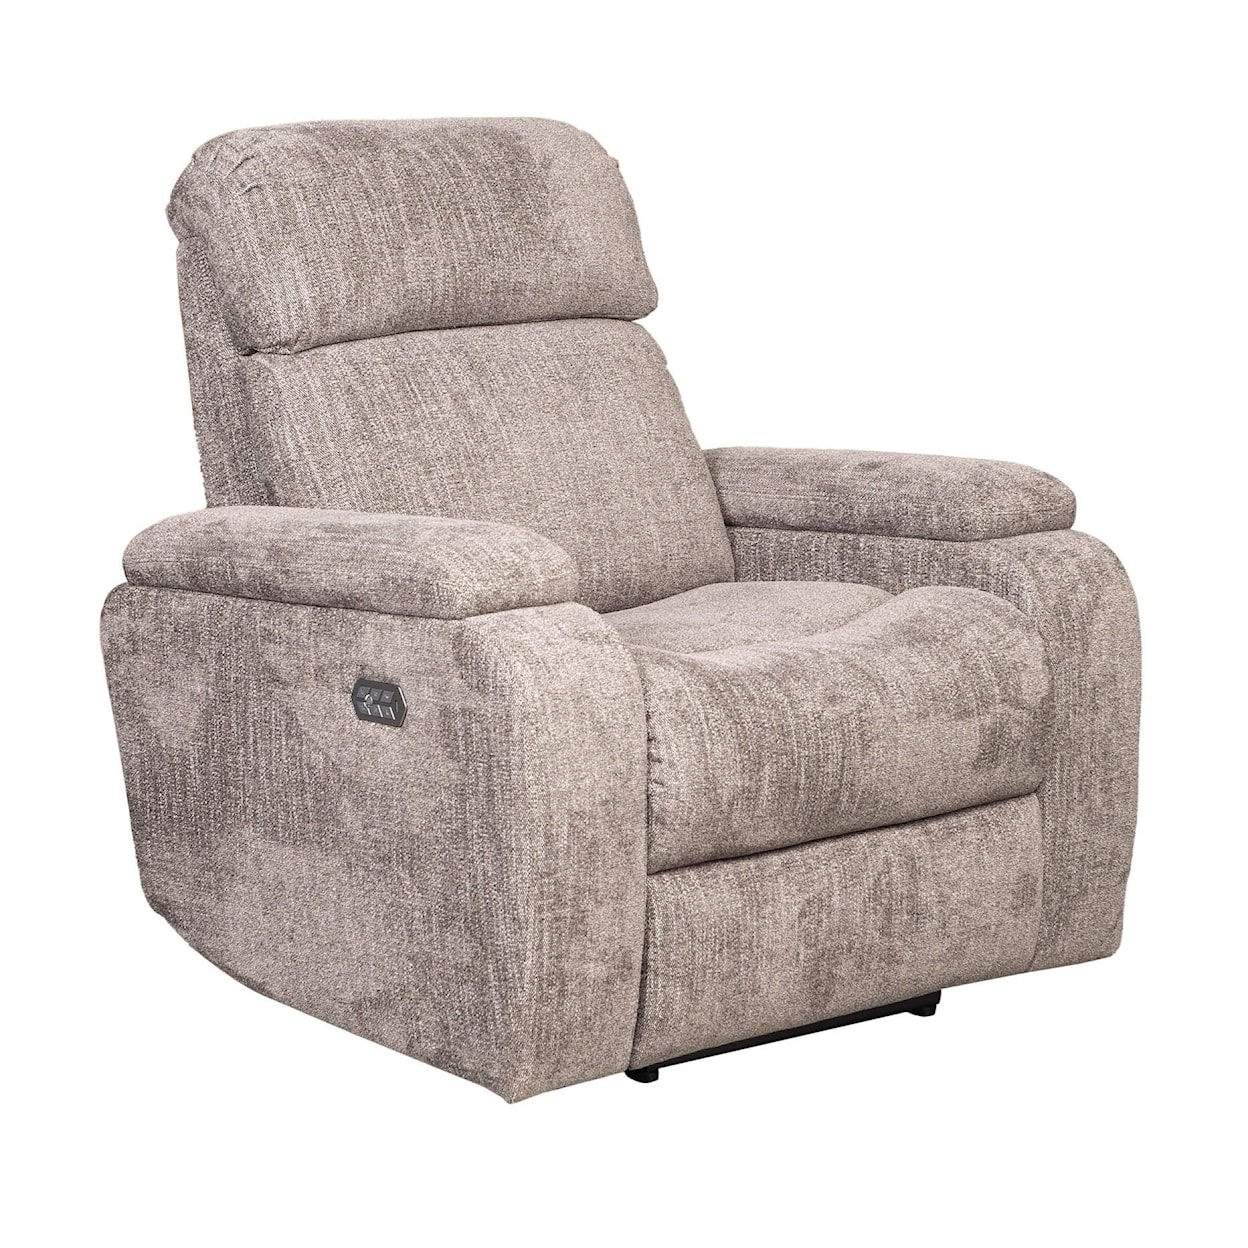 Synergy Home Furnishings 5025 Power Recliner